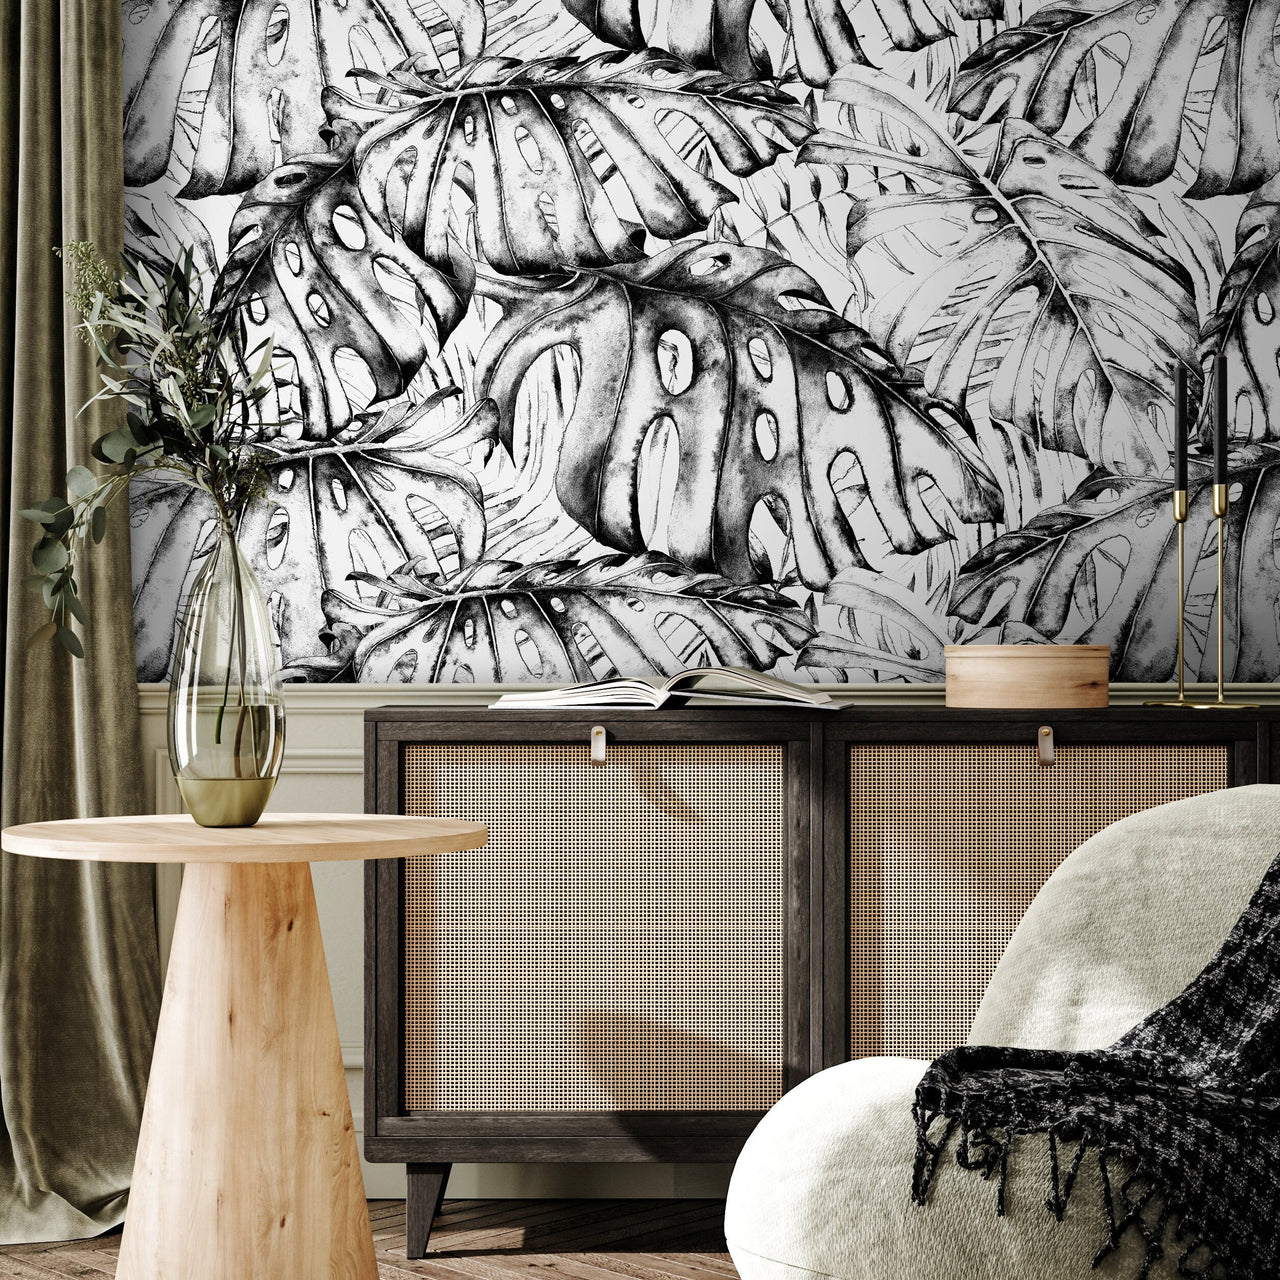 Wall Decor Wallpaper Peel and Stick Wallpaper Removable Wallpaper Home Decor Wall Art Room Decor / Black and White Leaves Wallpaper - B778